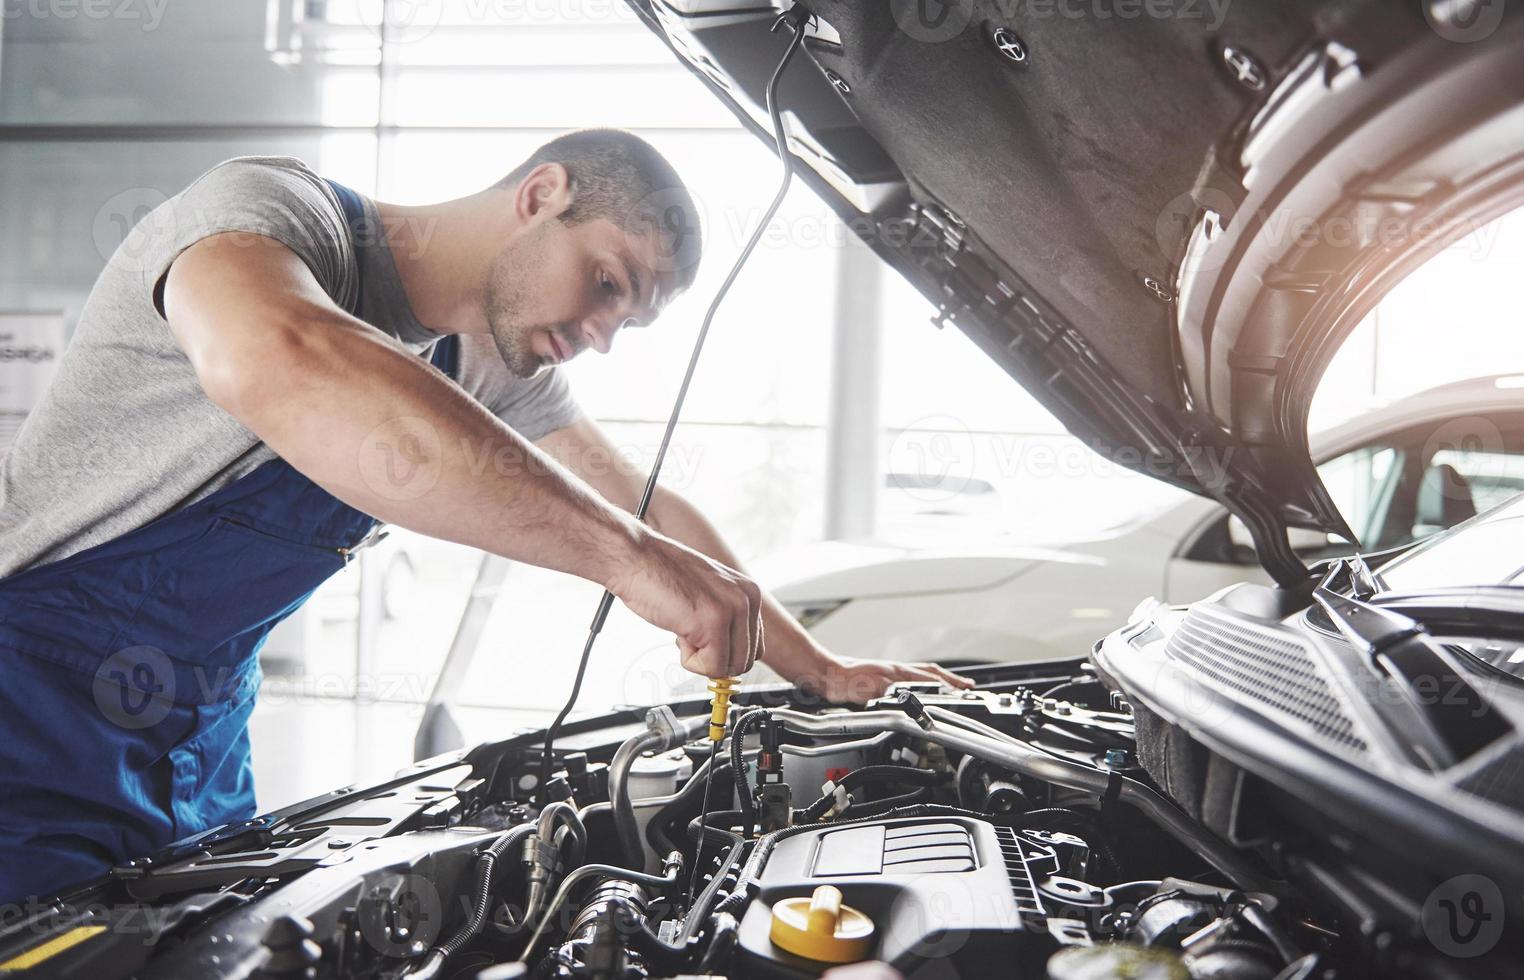 Picture showing muscular car service worker repairing vehicle photo